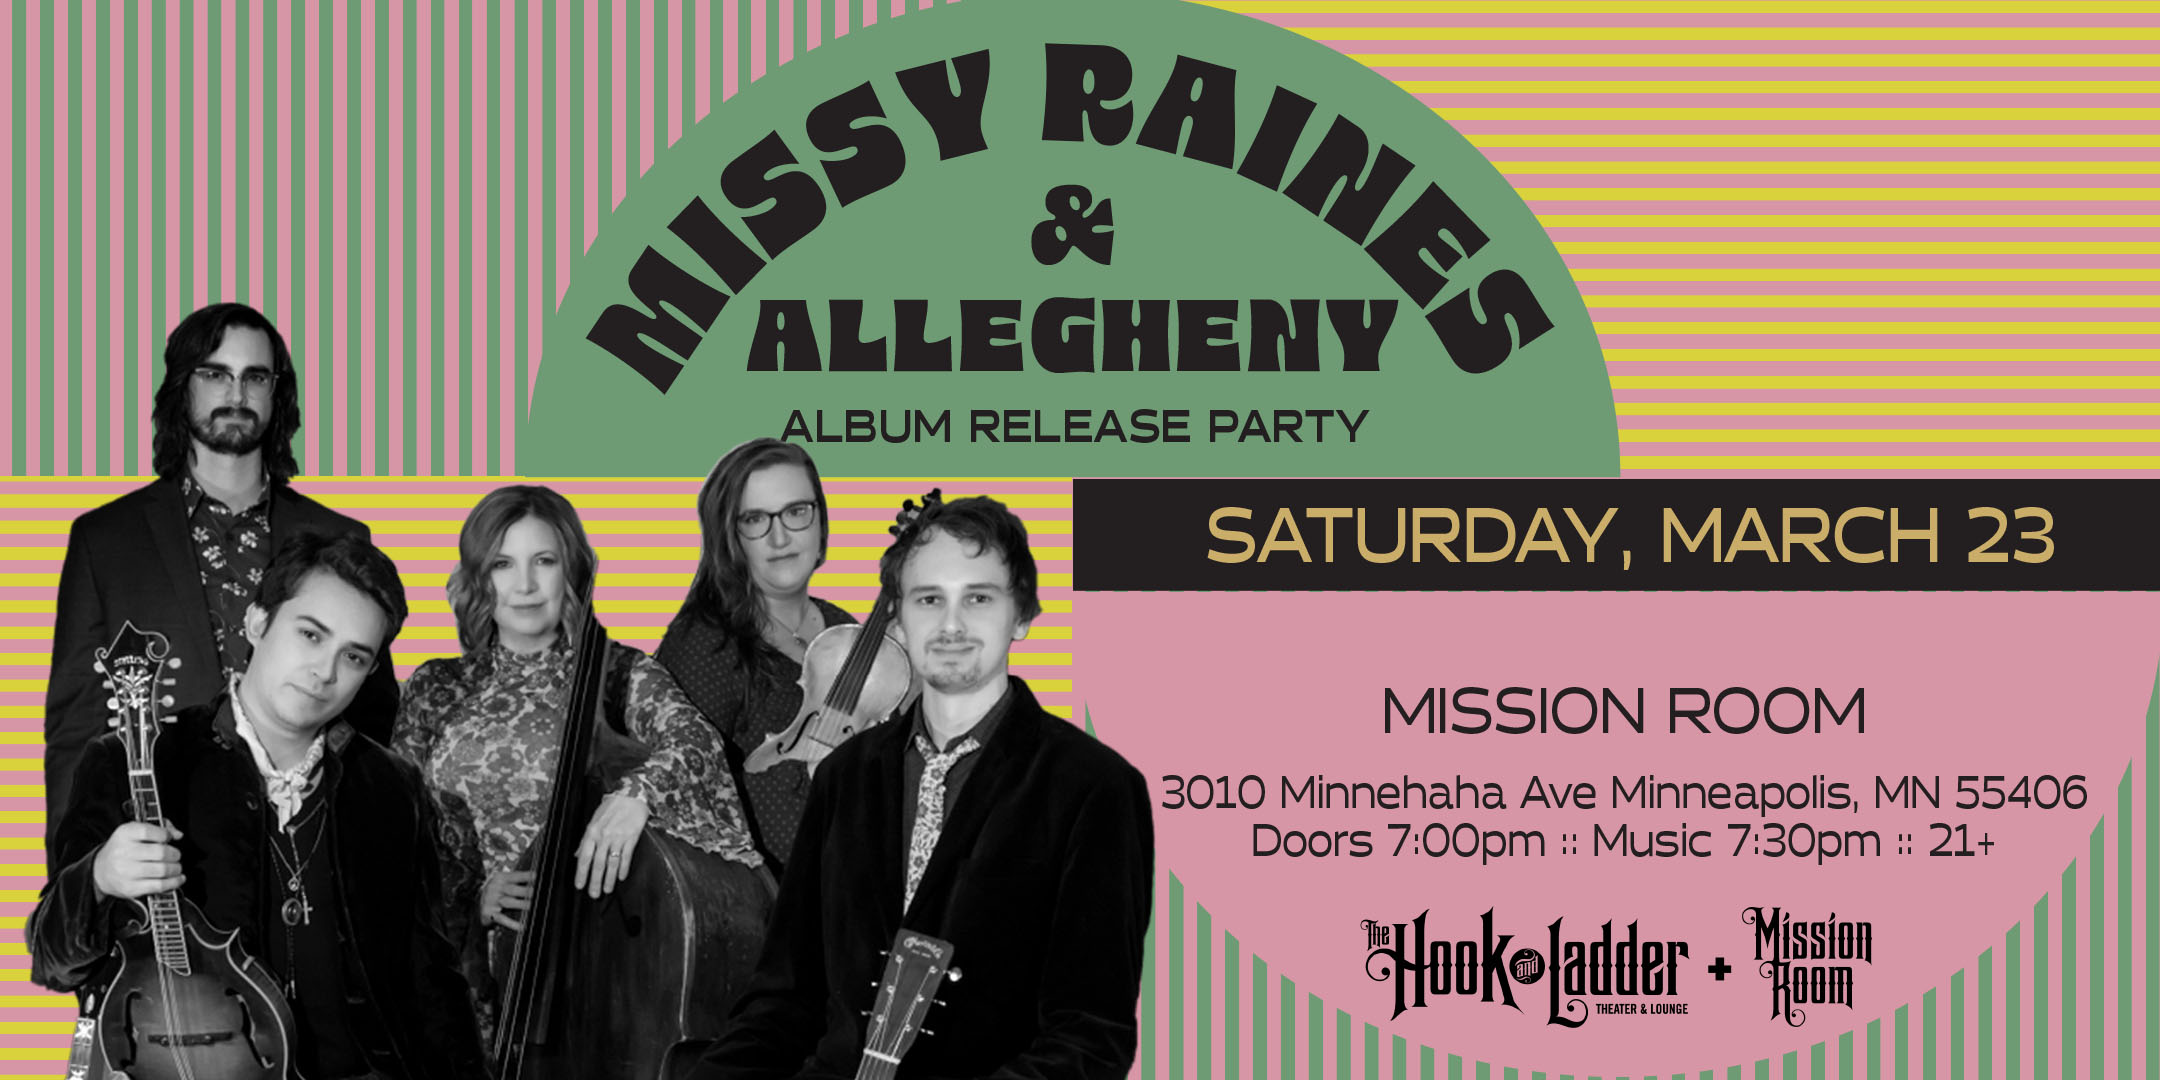 Missy Raines & Allegheny Album Release Party Saturday, March 23, 2024 The Mission Room at The Hook and Ladder Theater Doors 7:00pm :: Show 7:30pm :: 21+ Seating: $25 General Admission: $18 Advance / $25 Day of Show